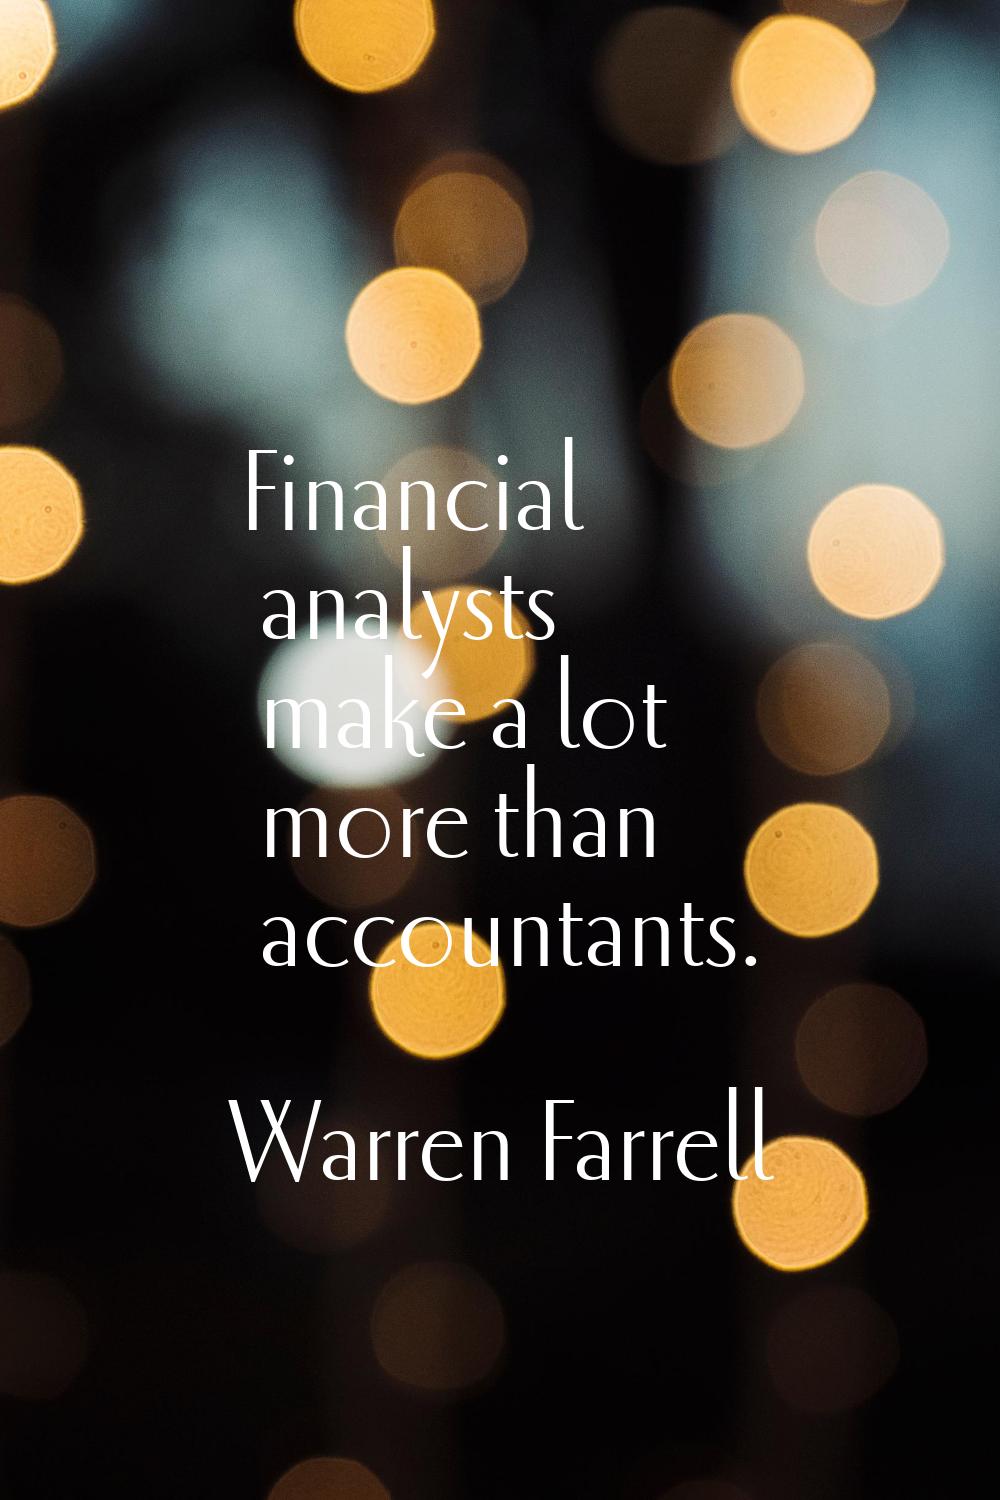 Financial analysts make a lot more than accountants.